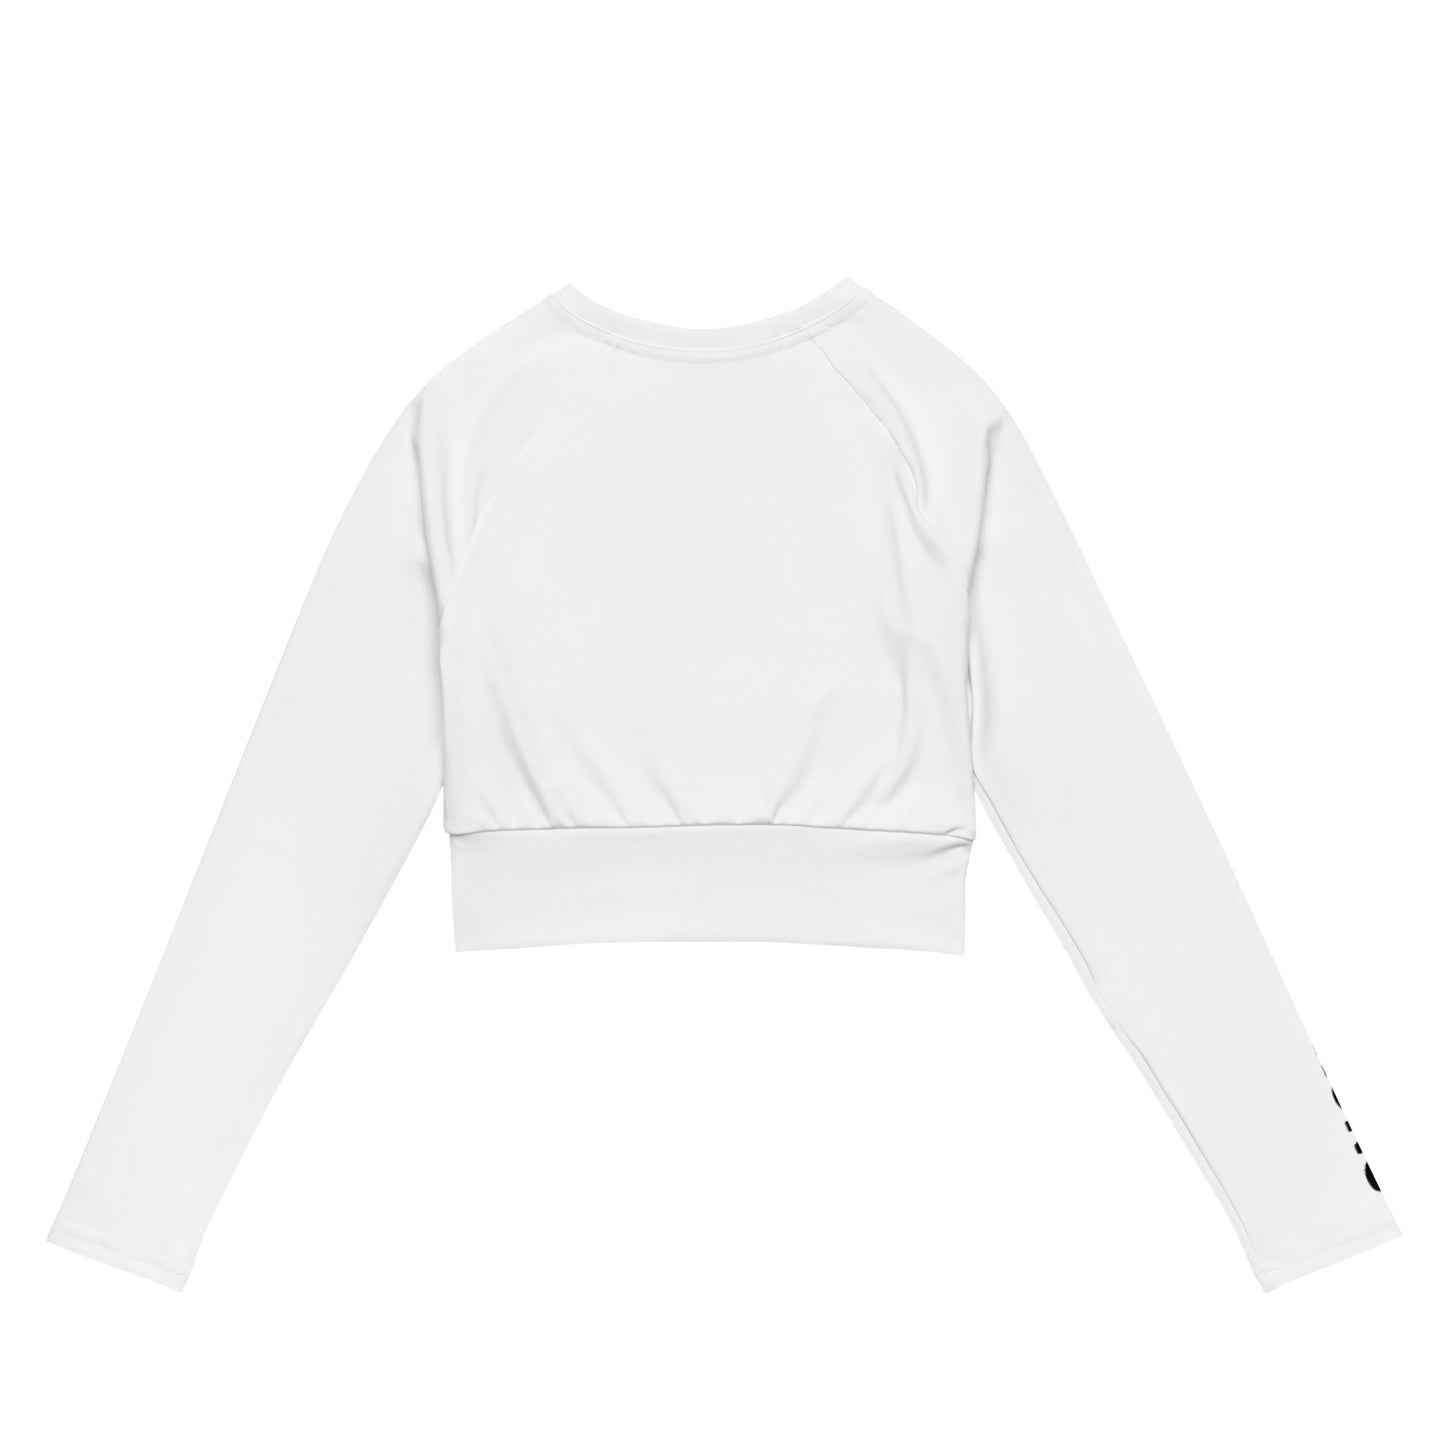 THE ESSENTIAL LONG SLEEVE FITTED CROP TOP WHITE